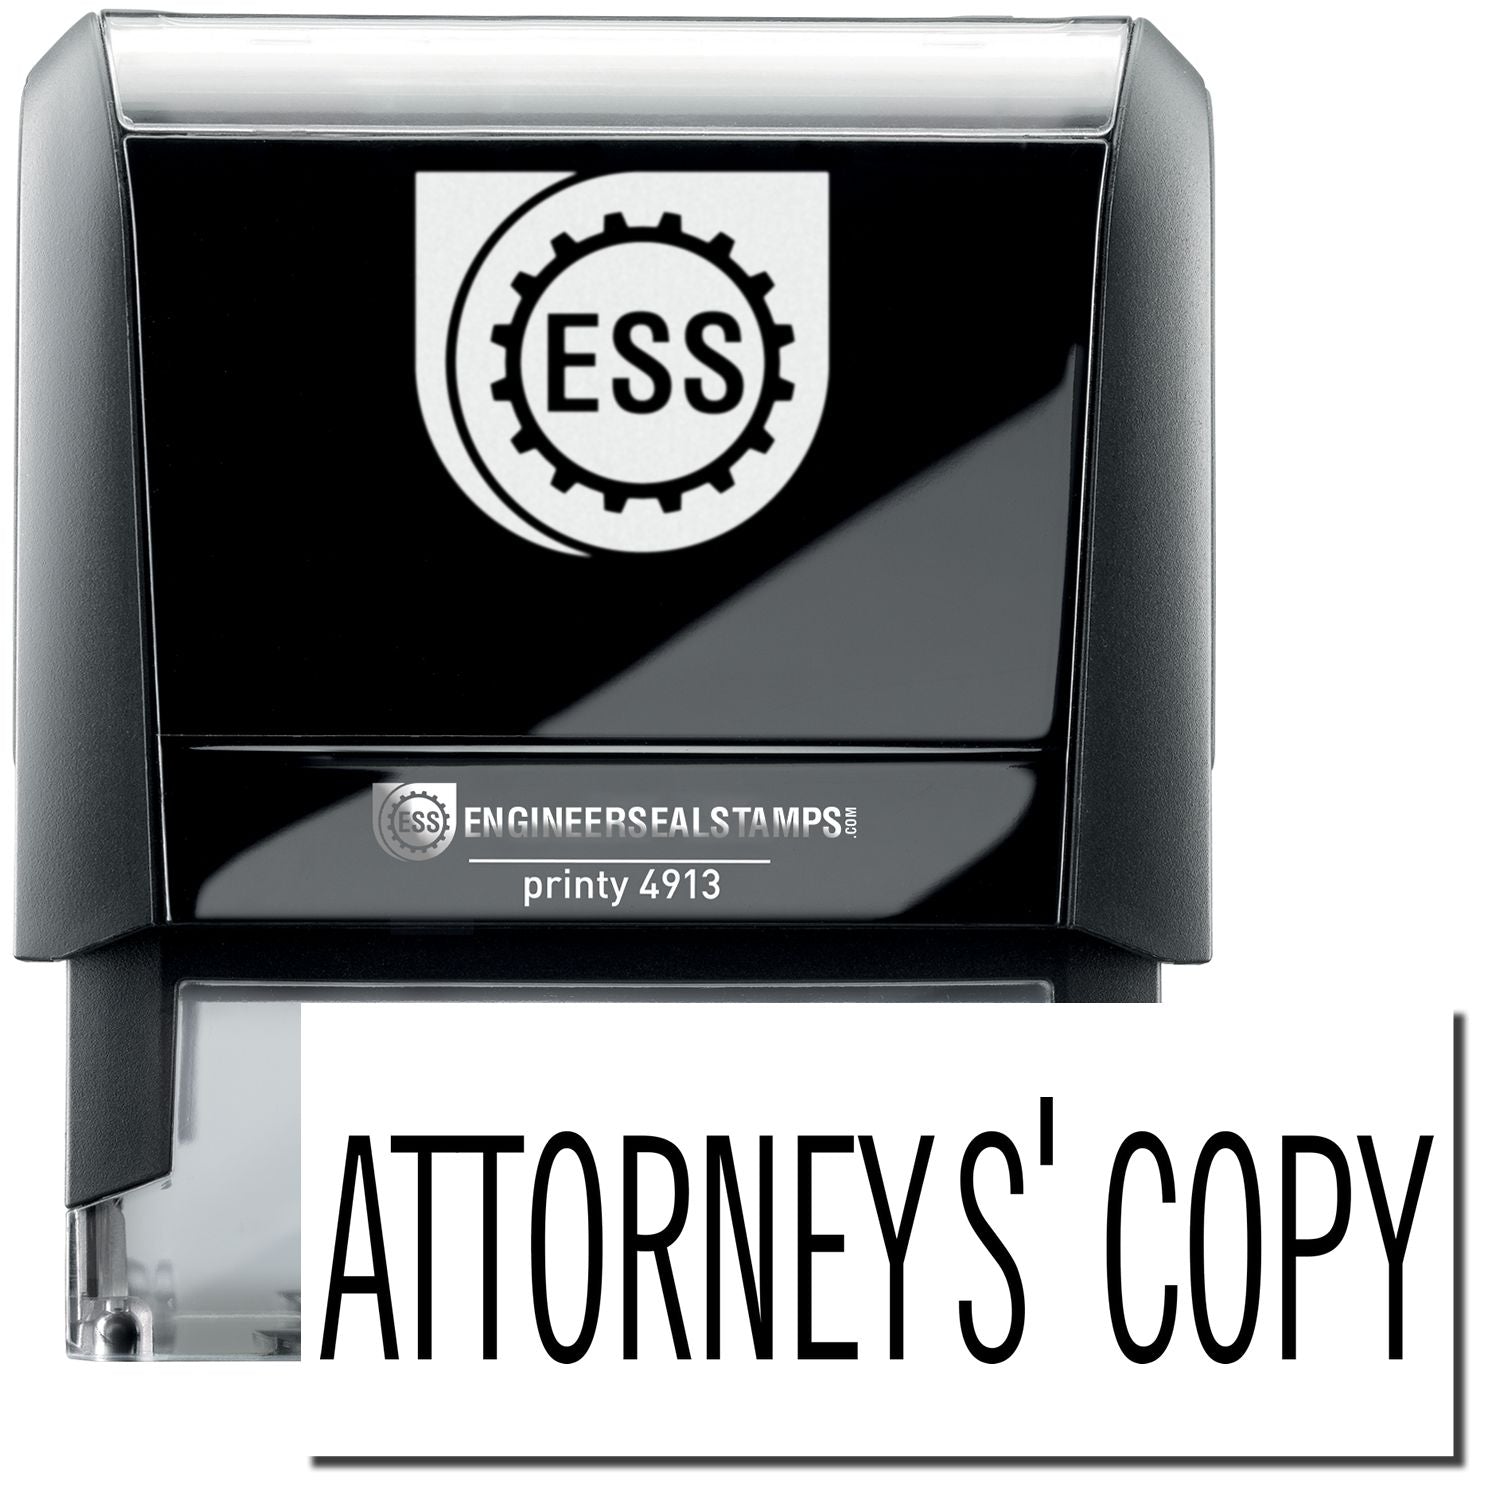 A self-inking stamp with a stamped image showing how the text "ATTORNEYS' COPY" in a large font is displayed by it after stamping.